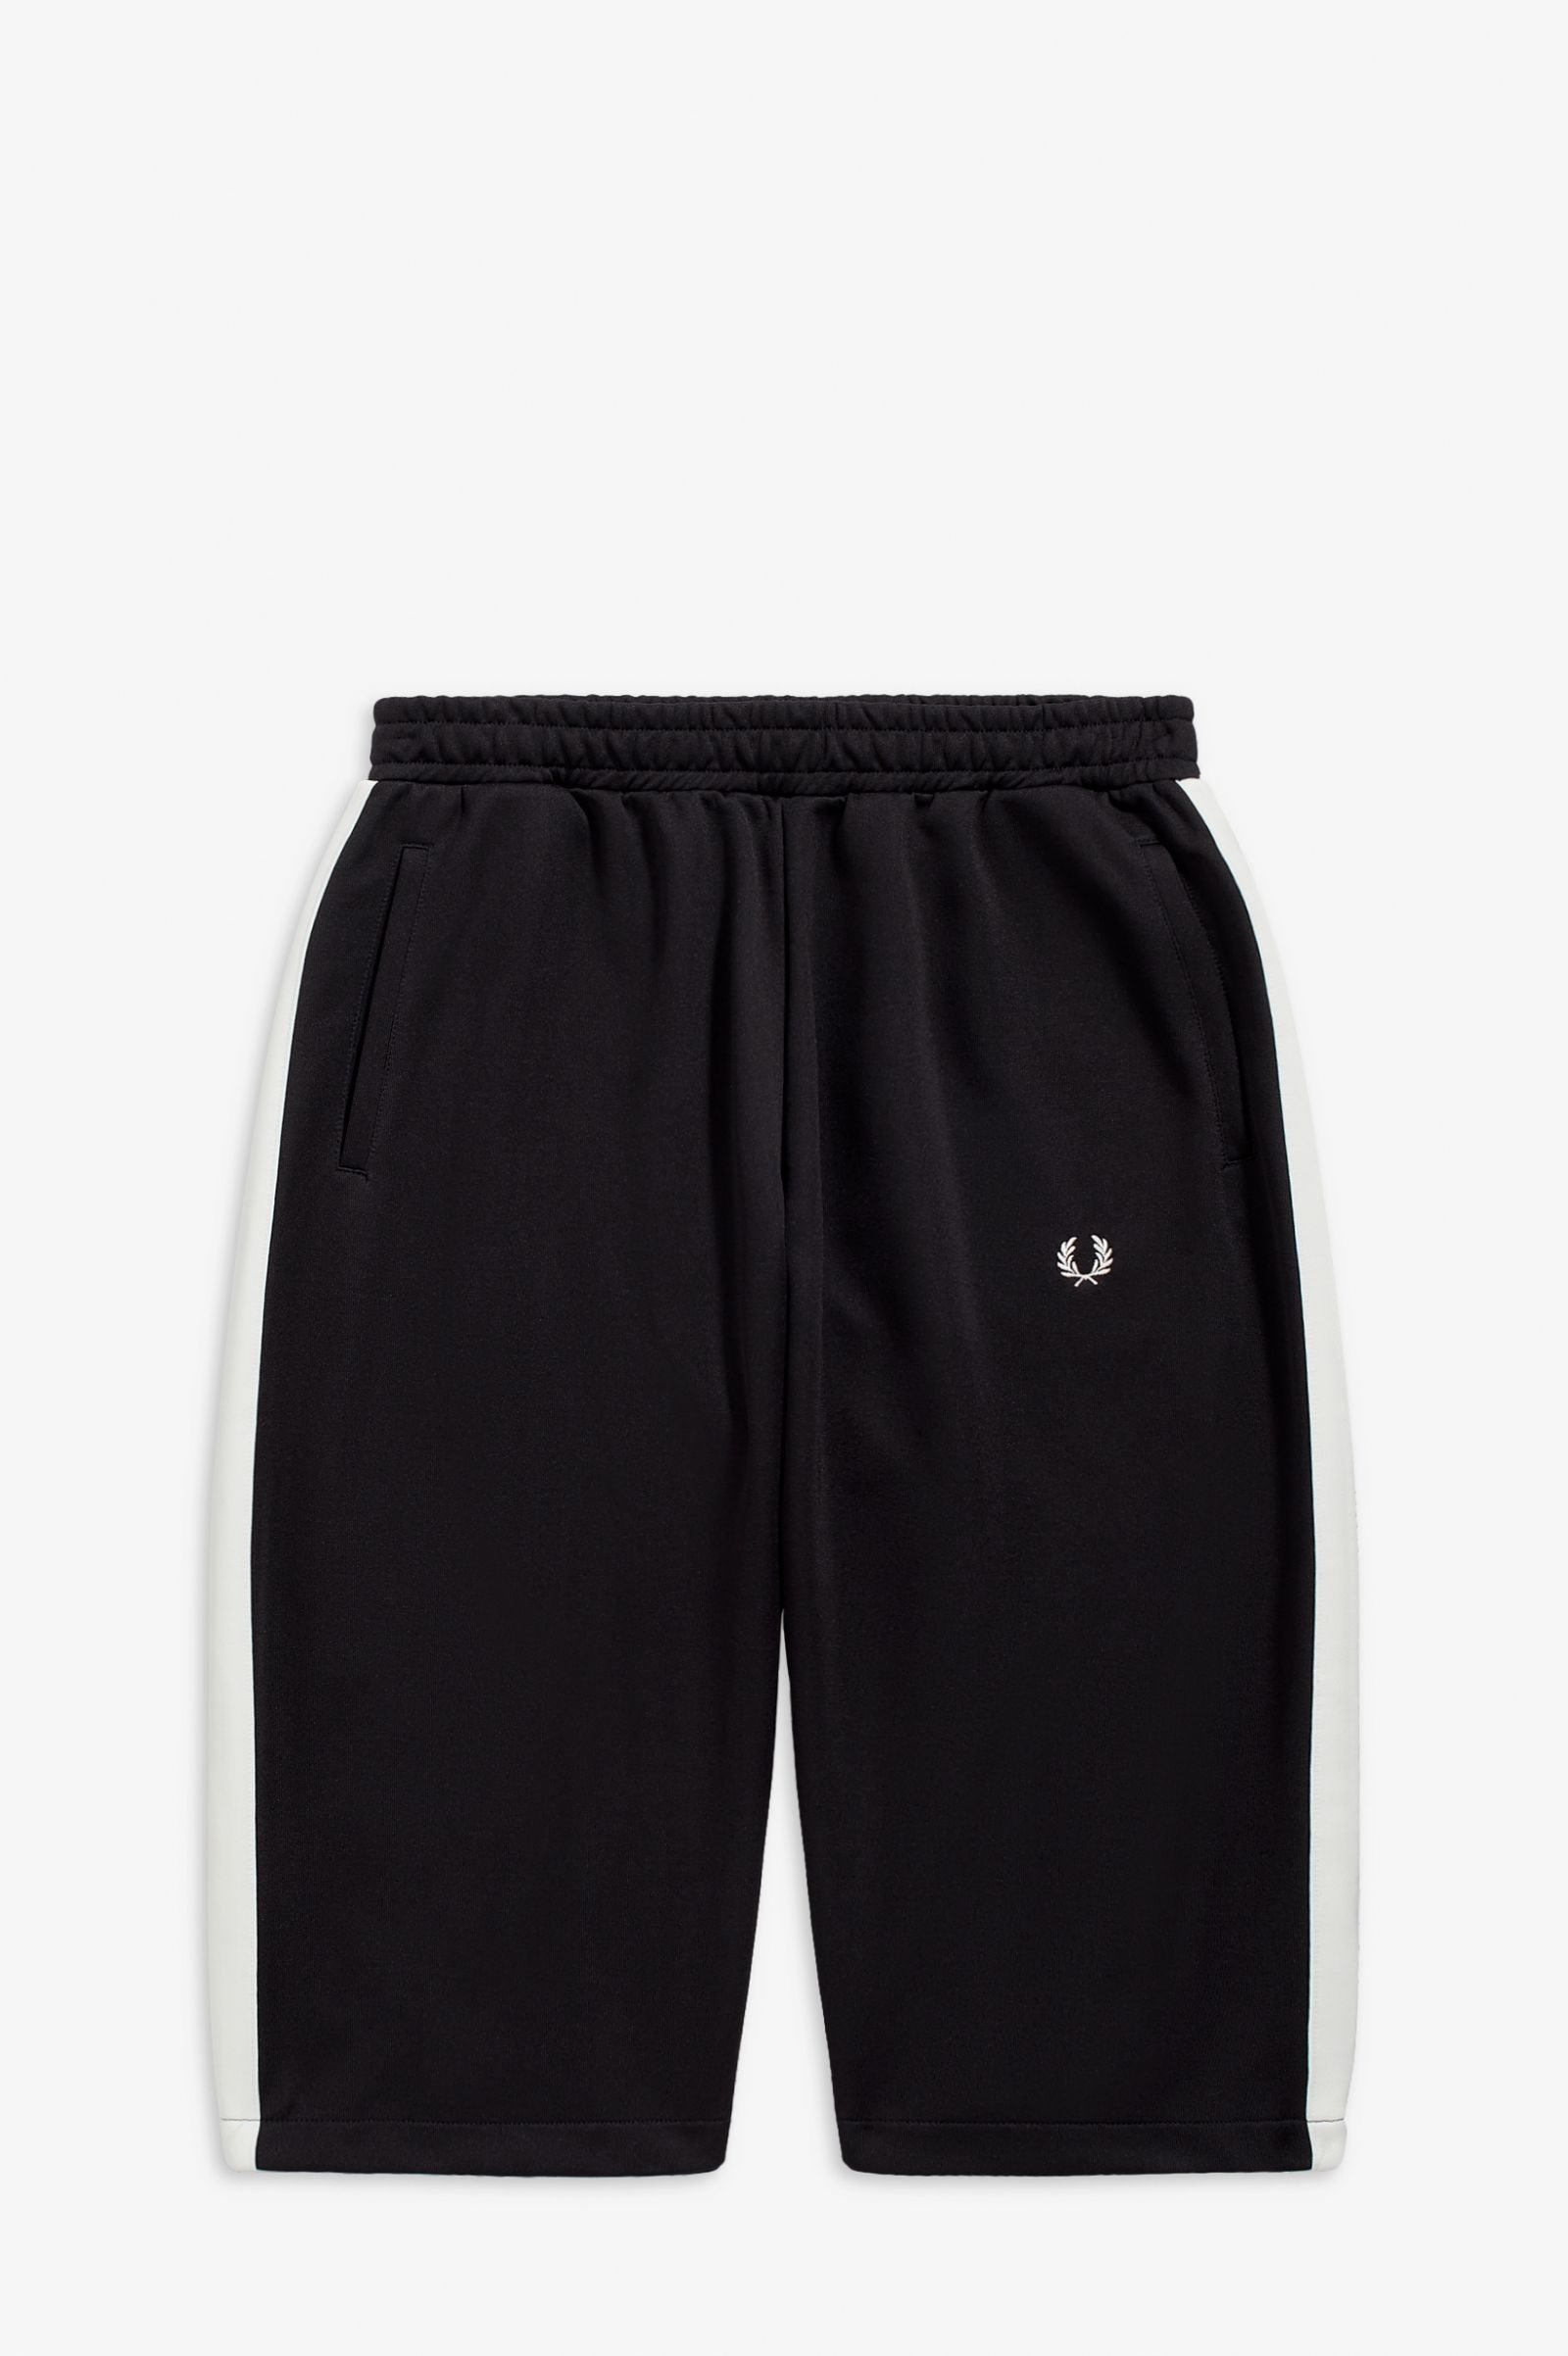 fred perry tracksuit bottoms